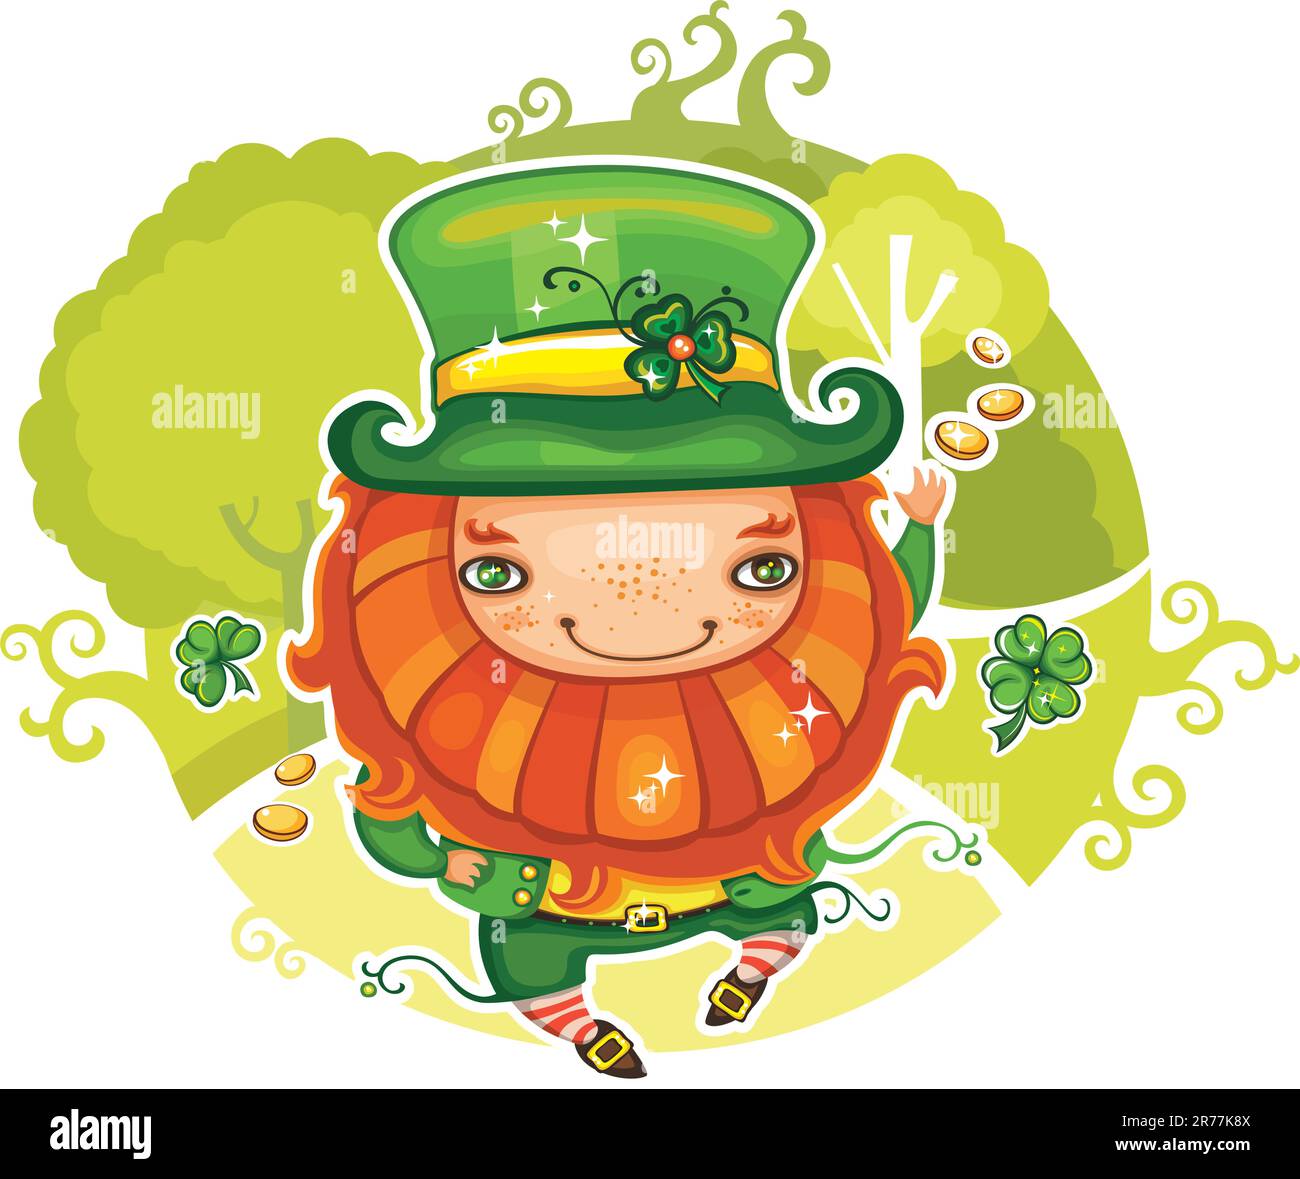 Vector illustration of St. Patrick's Day symbol, Leprechaun with shamrocks and coins, dancing at the magical forest. Can be used as greeting card. Stock Vector